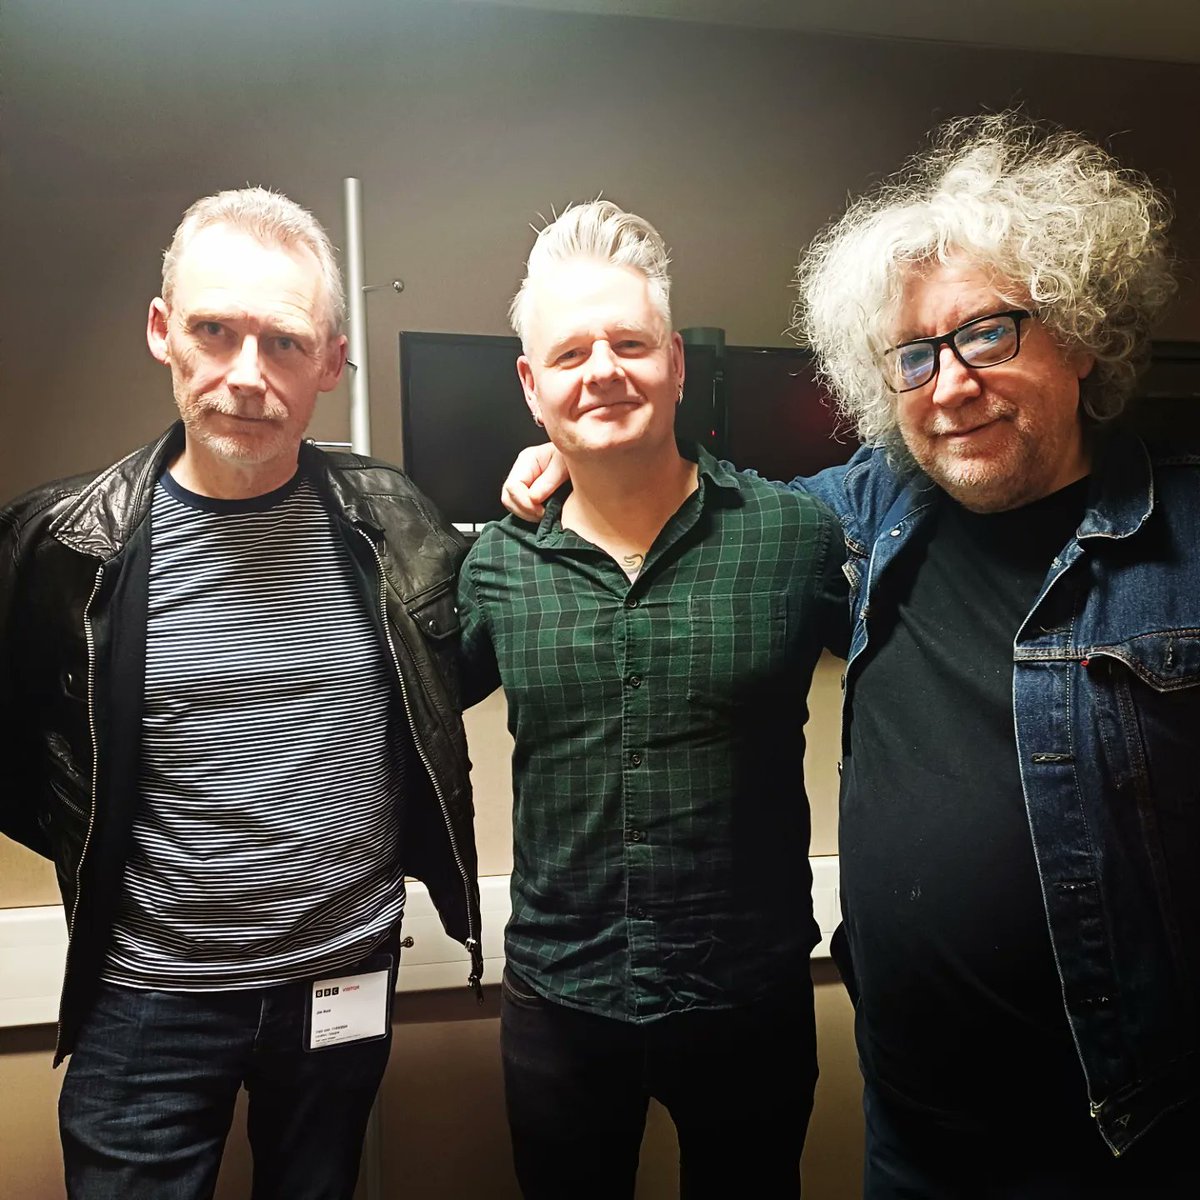 Easter Monday Special 🐣🐰🤟 8pm 2NITE @BBCRadioScot @BBCSounds I'm 'In Conversation' with Jim & William Reid @TheMaryChain Plus Iggy Pop, St Etienne, Twin Atlantic, Gallus, Warpaint, Captain Beefheart, Black Cat Bone, Portishead & Triple AAA from LKJ ❤️ bbc.co.uk/programmes/m00…